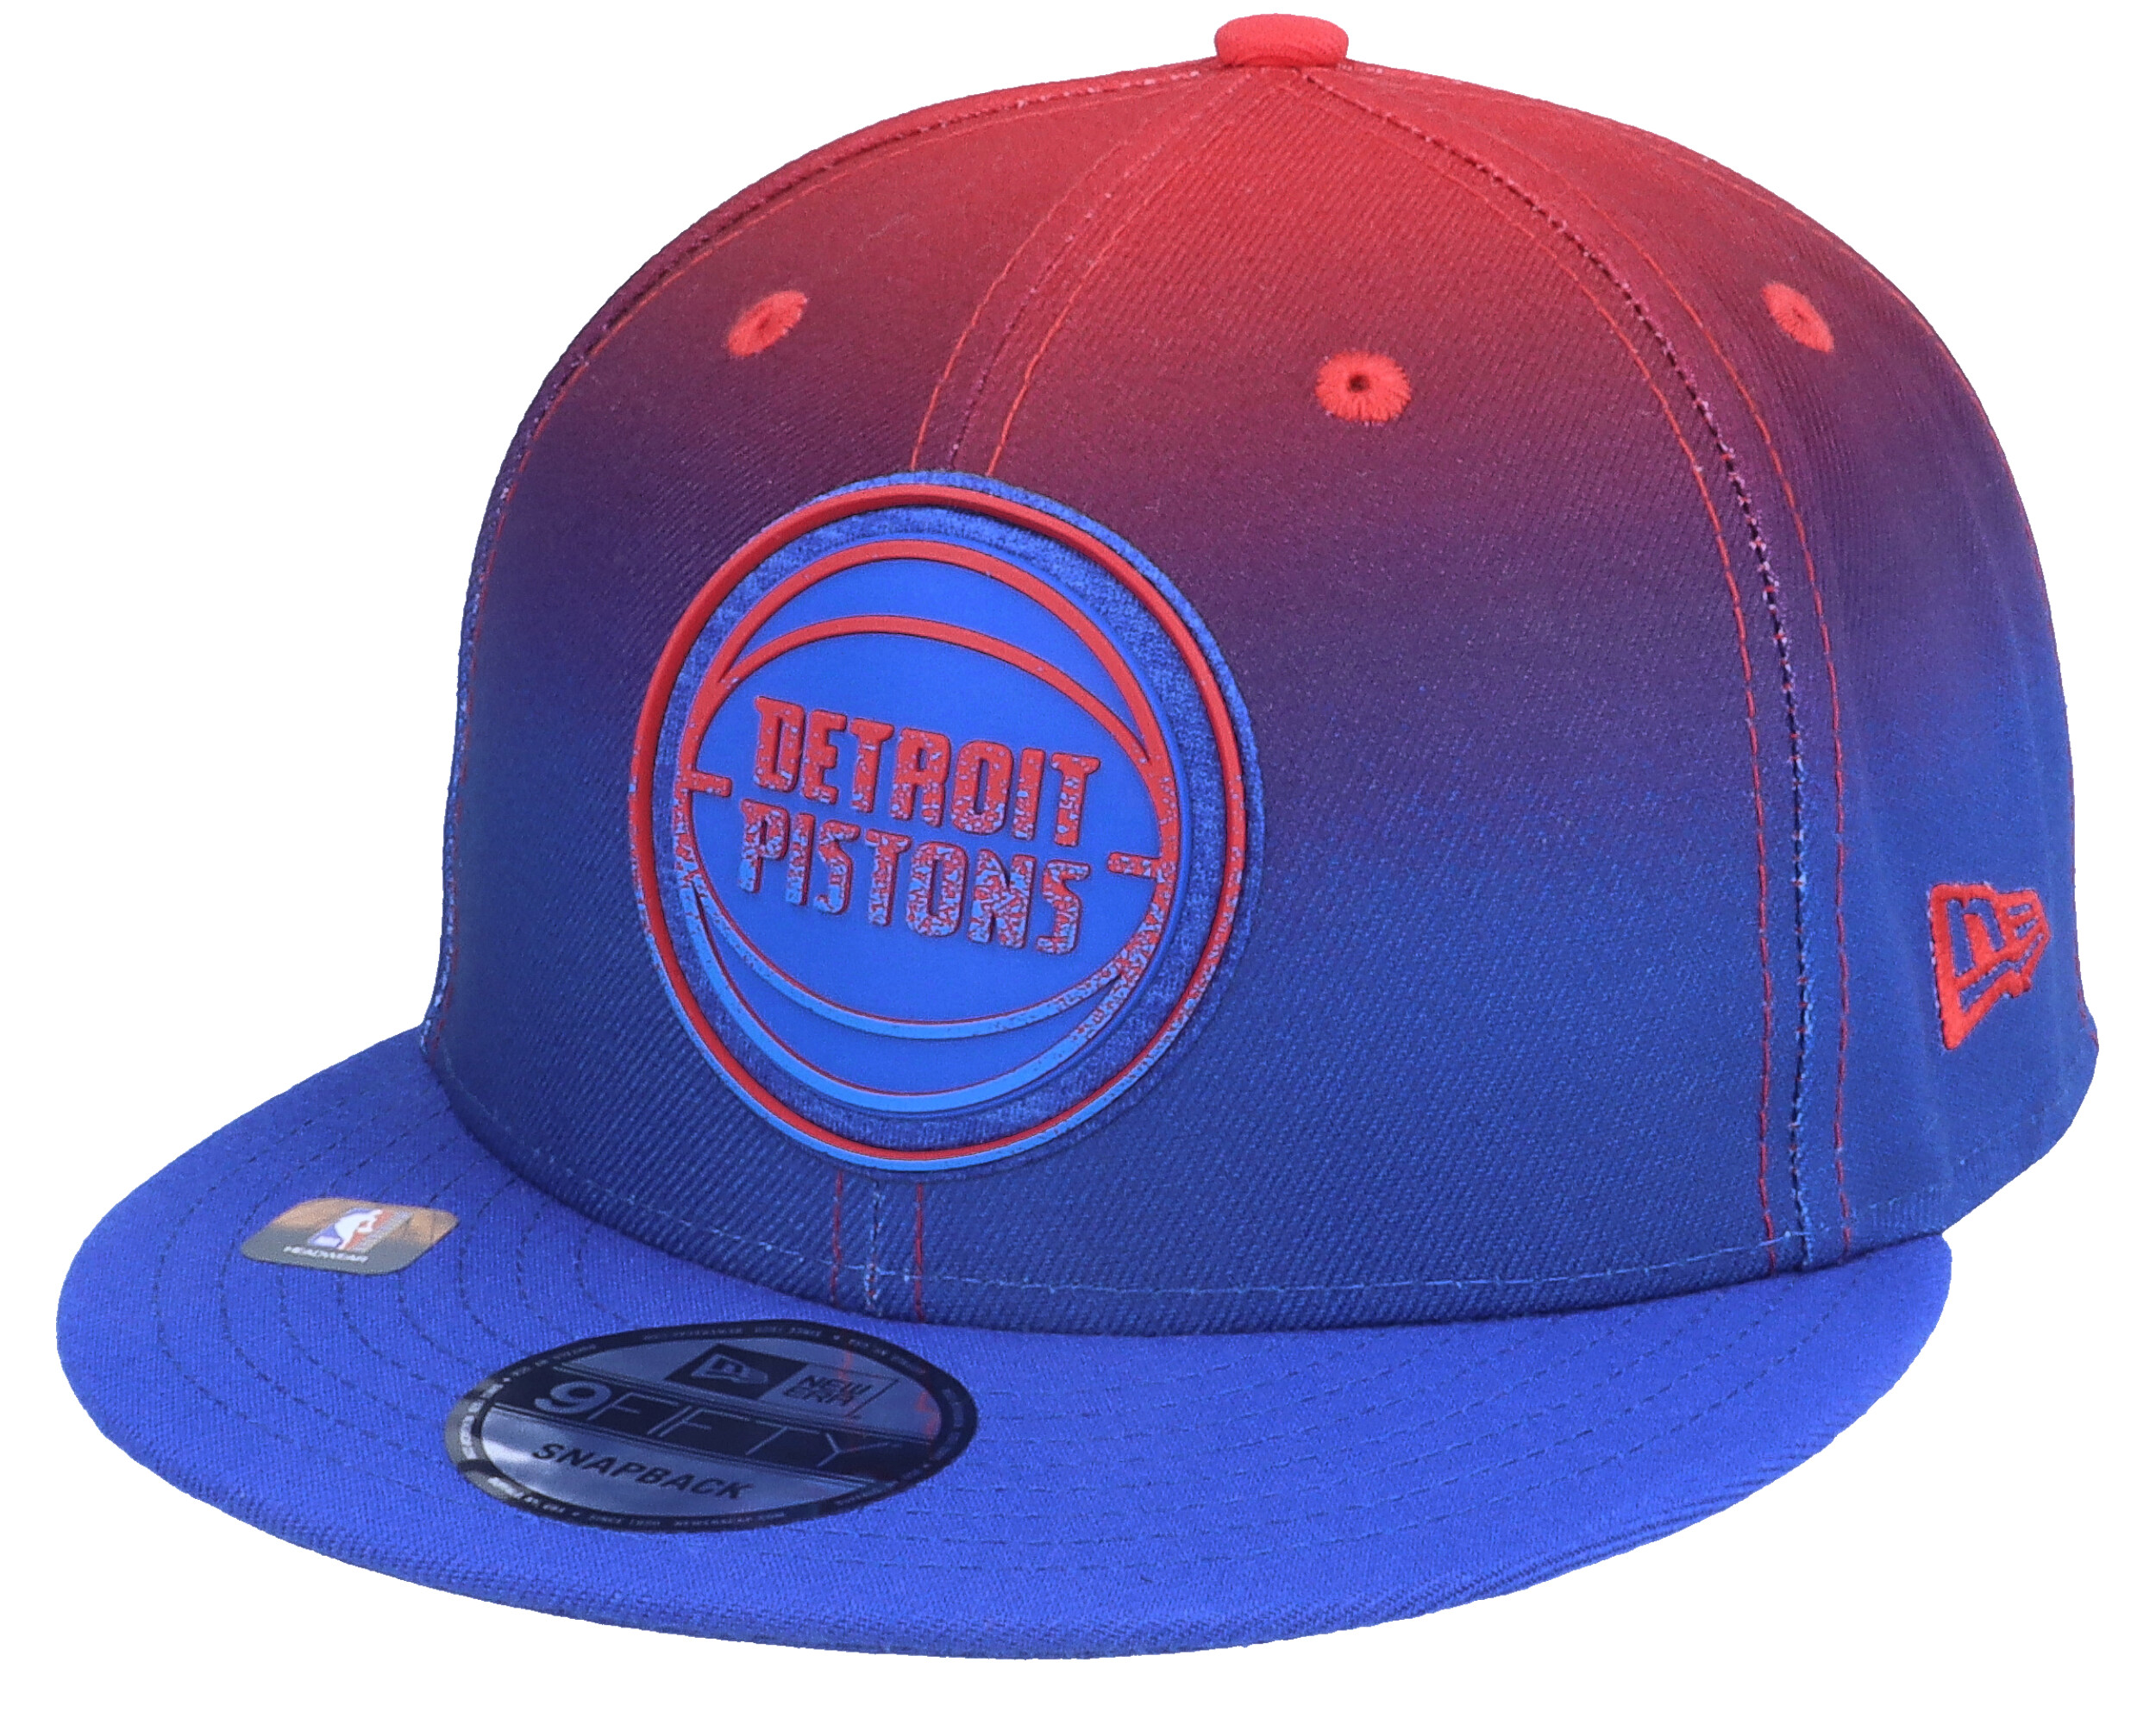 Lids Detroit Pistons New Era Back Half 9FIFTY Fitted Hat - White